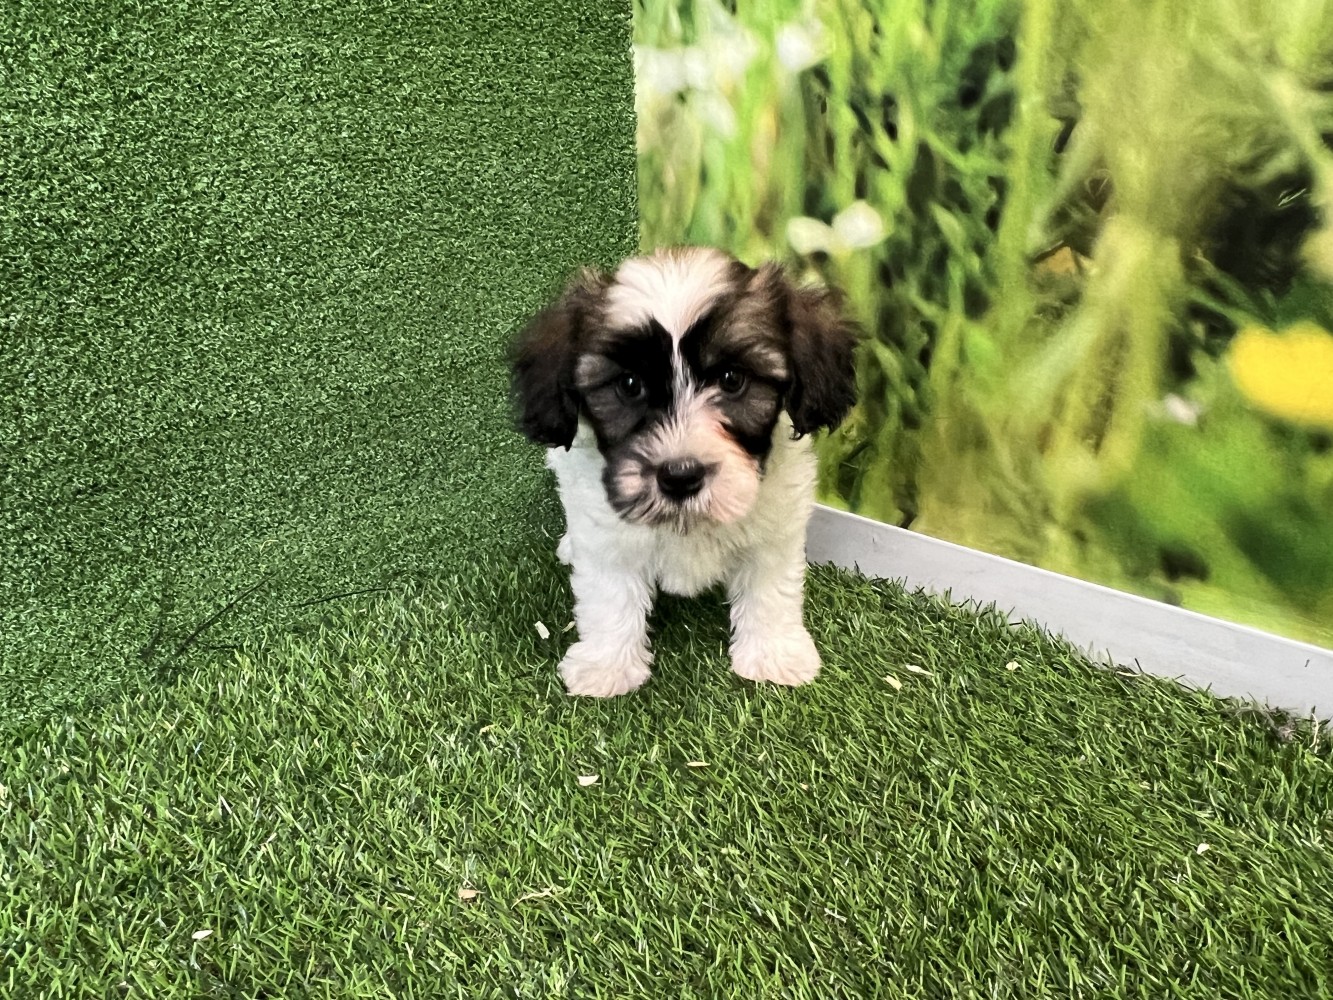 Crossbreed Lhasa Apso x Havanese female Puppy for sale 010589090